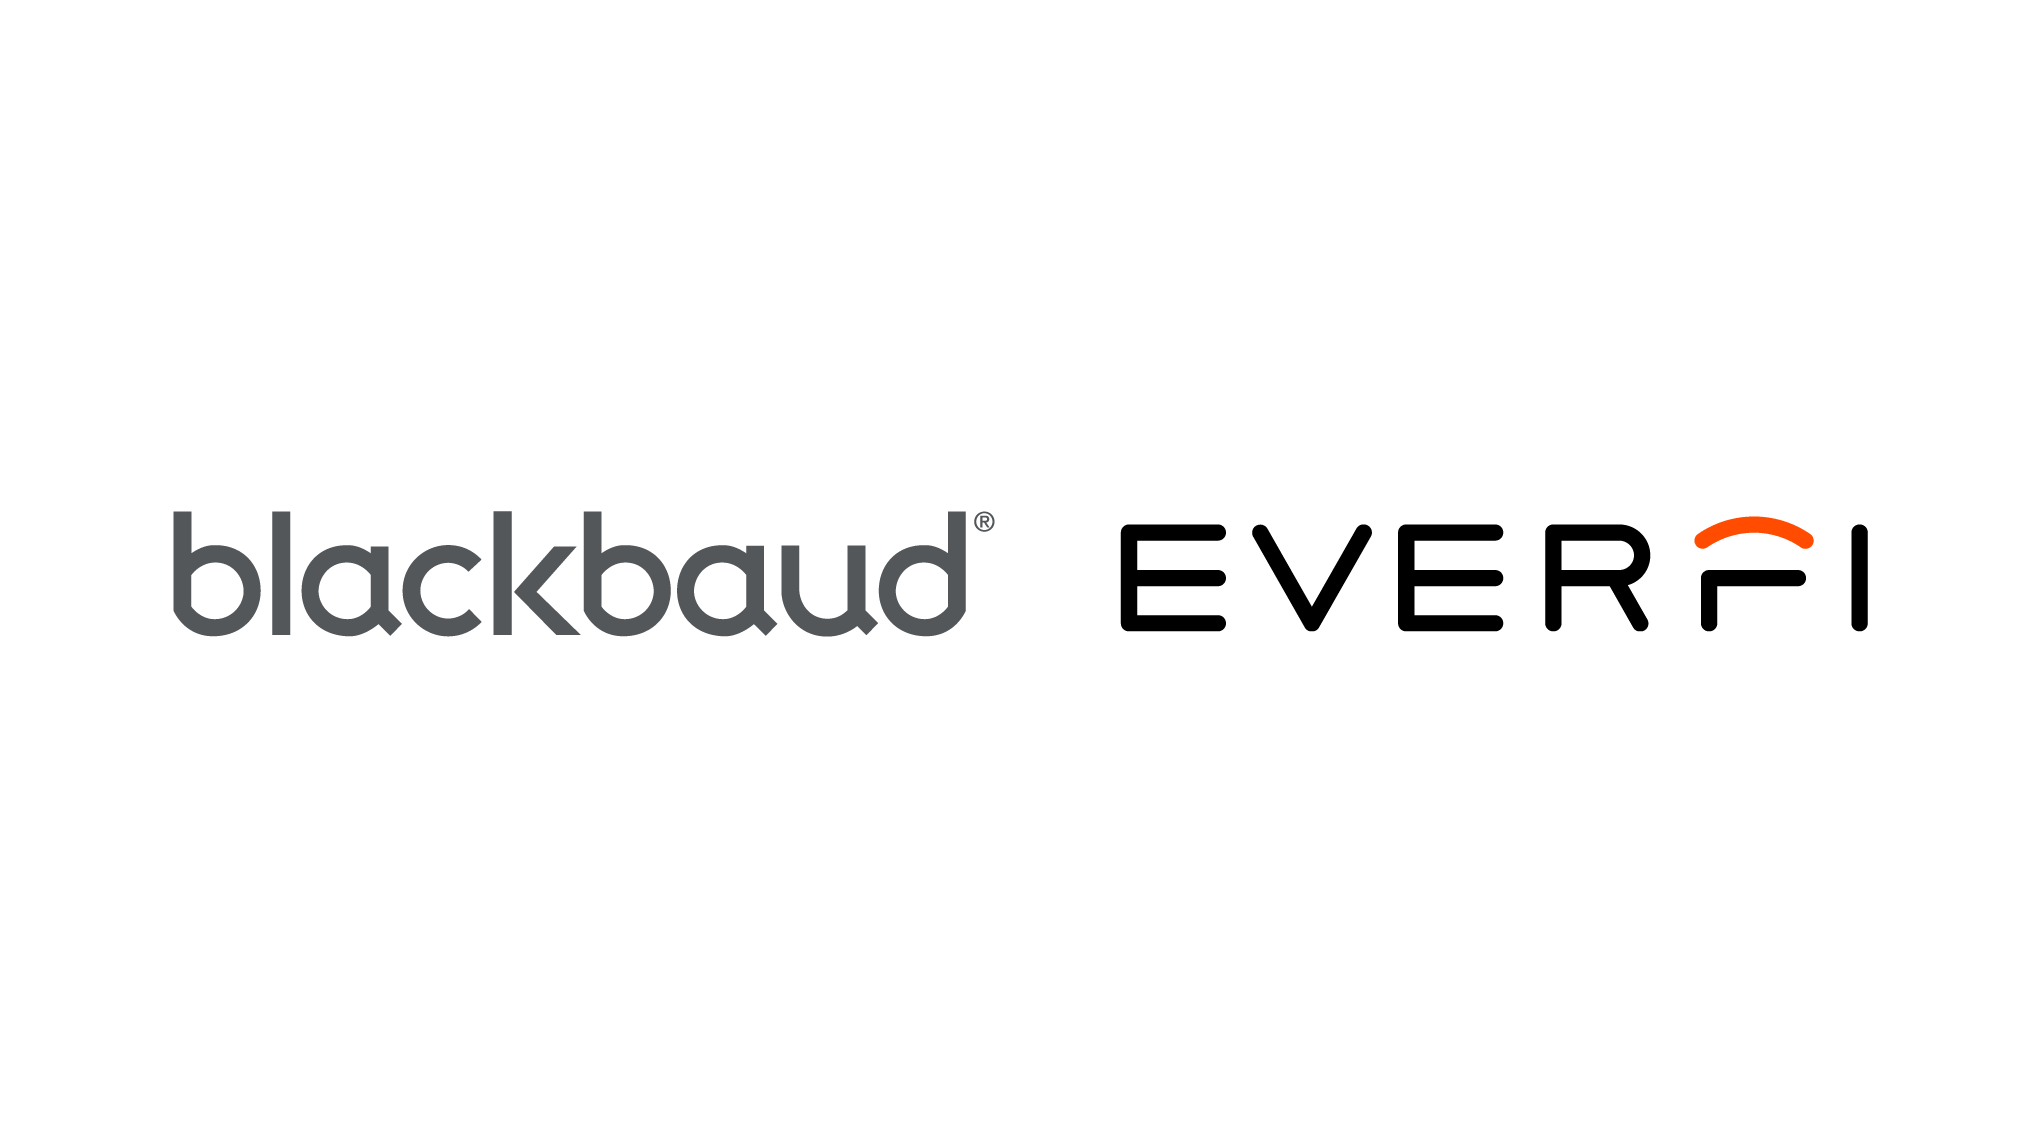 Cloud Software Firm Blackbaud Acquires Washington DC-based EdTech EVERFI For $750M